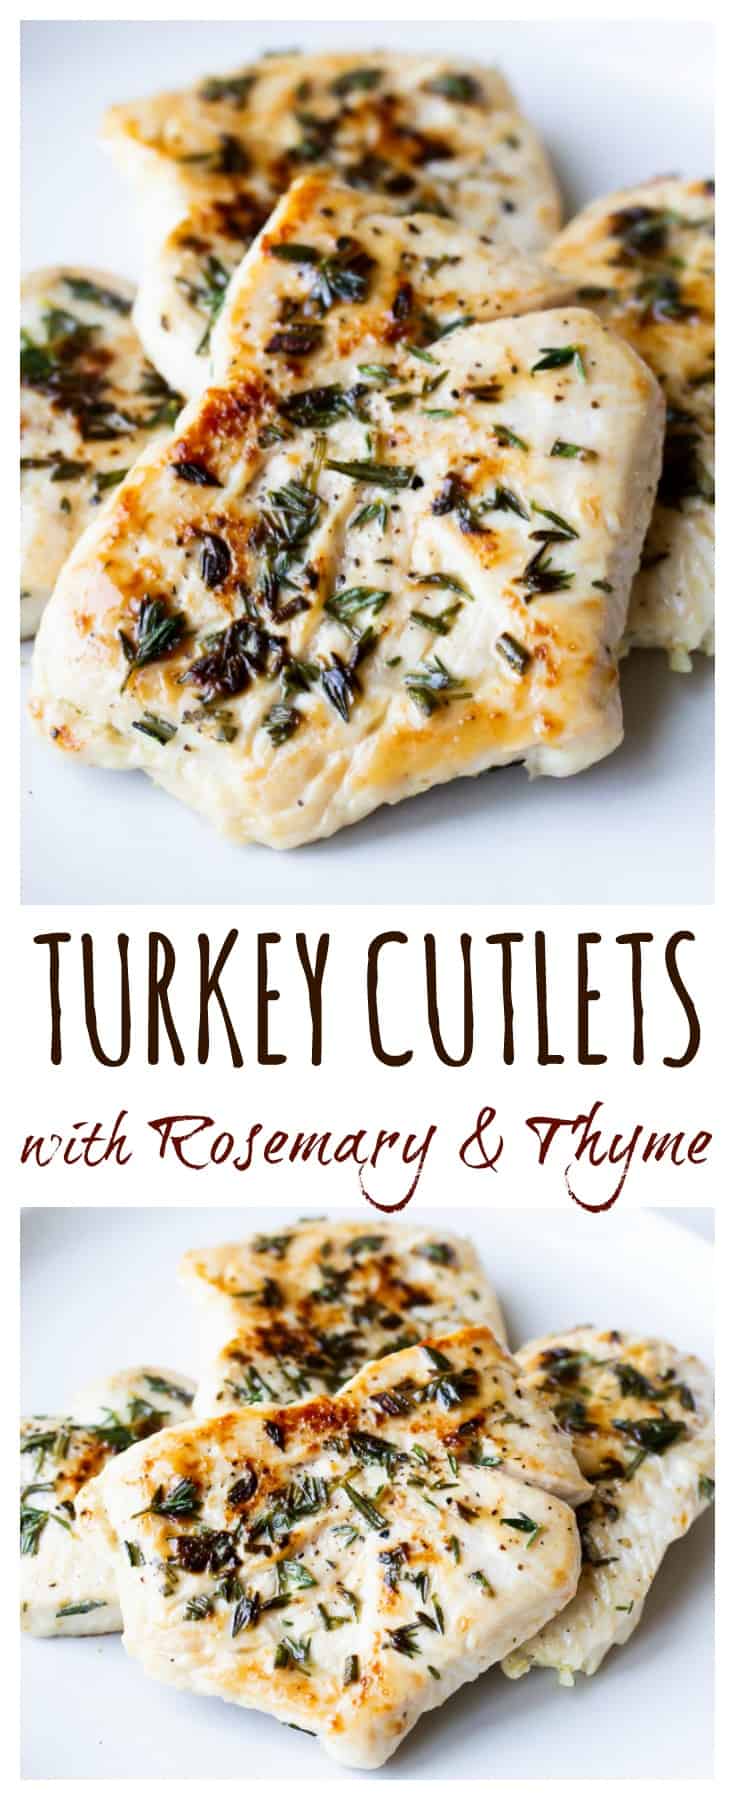 Turkey Cutlets with Rosemary and Thyme - Delicious Little Bites